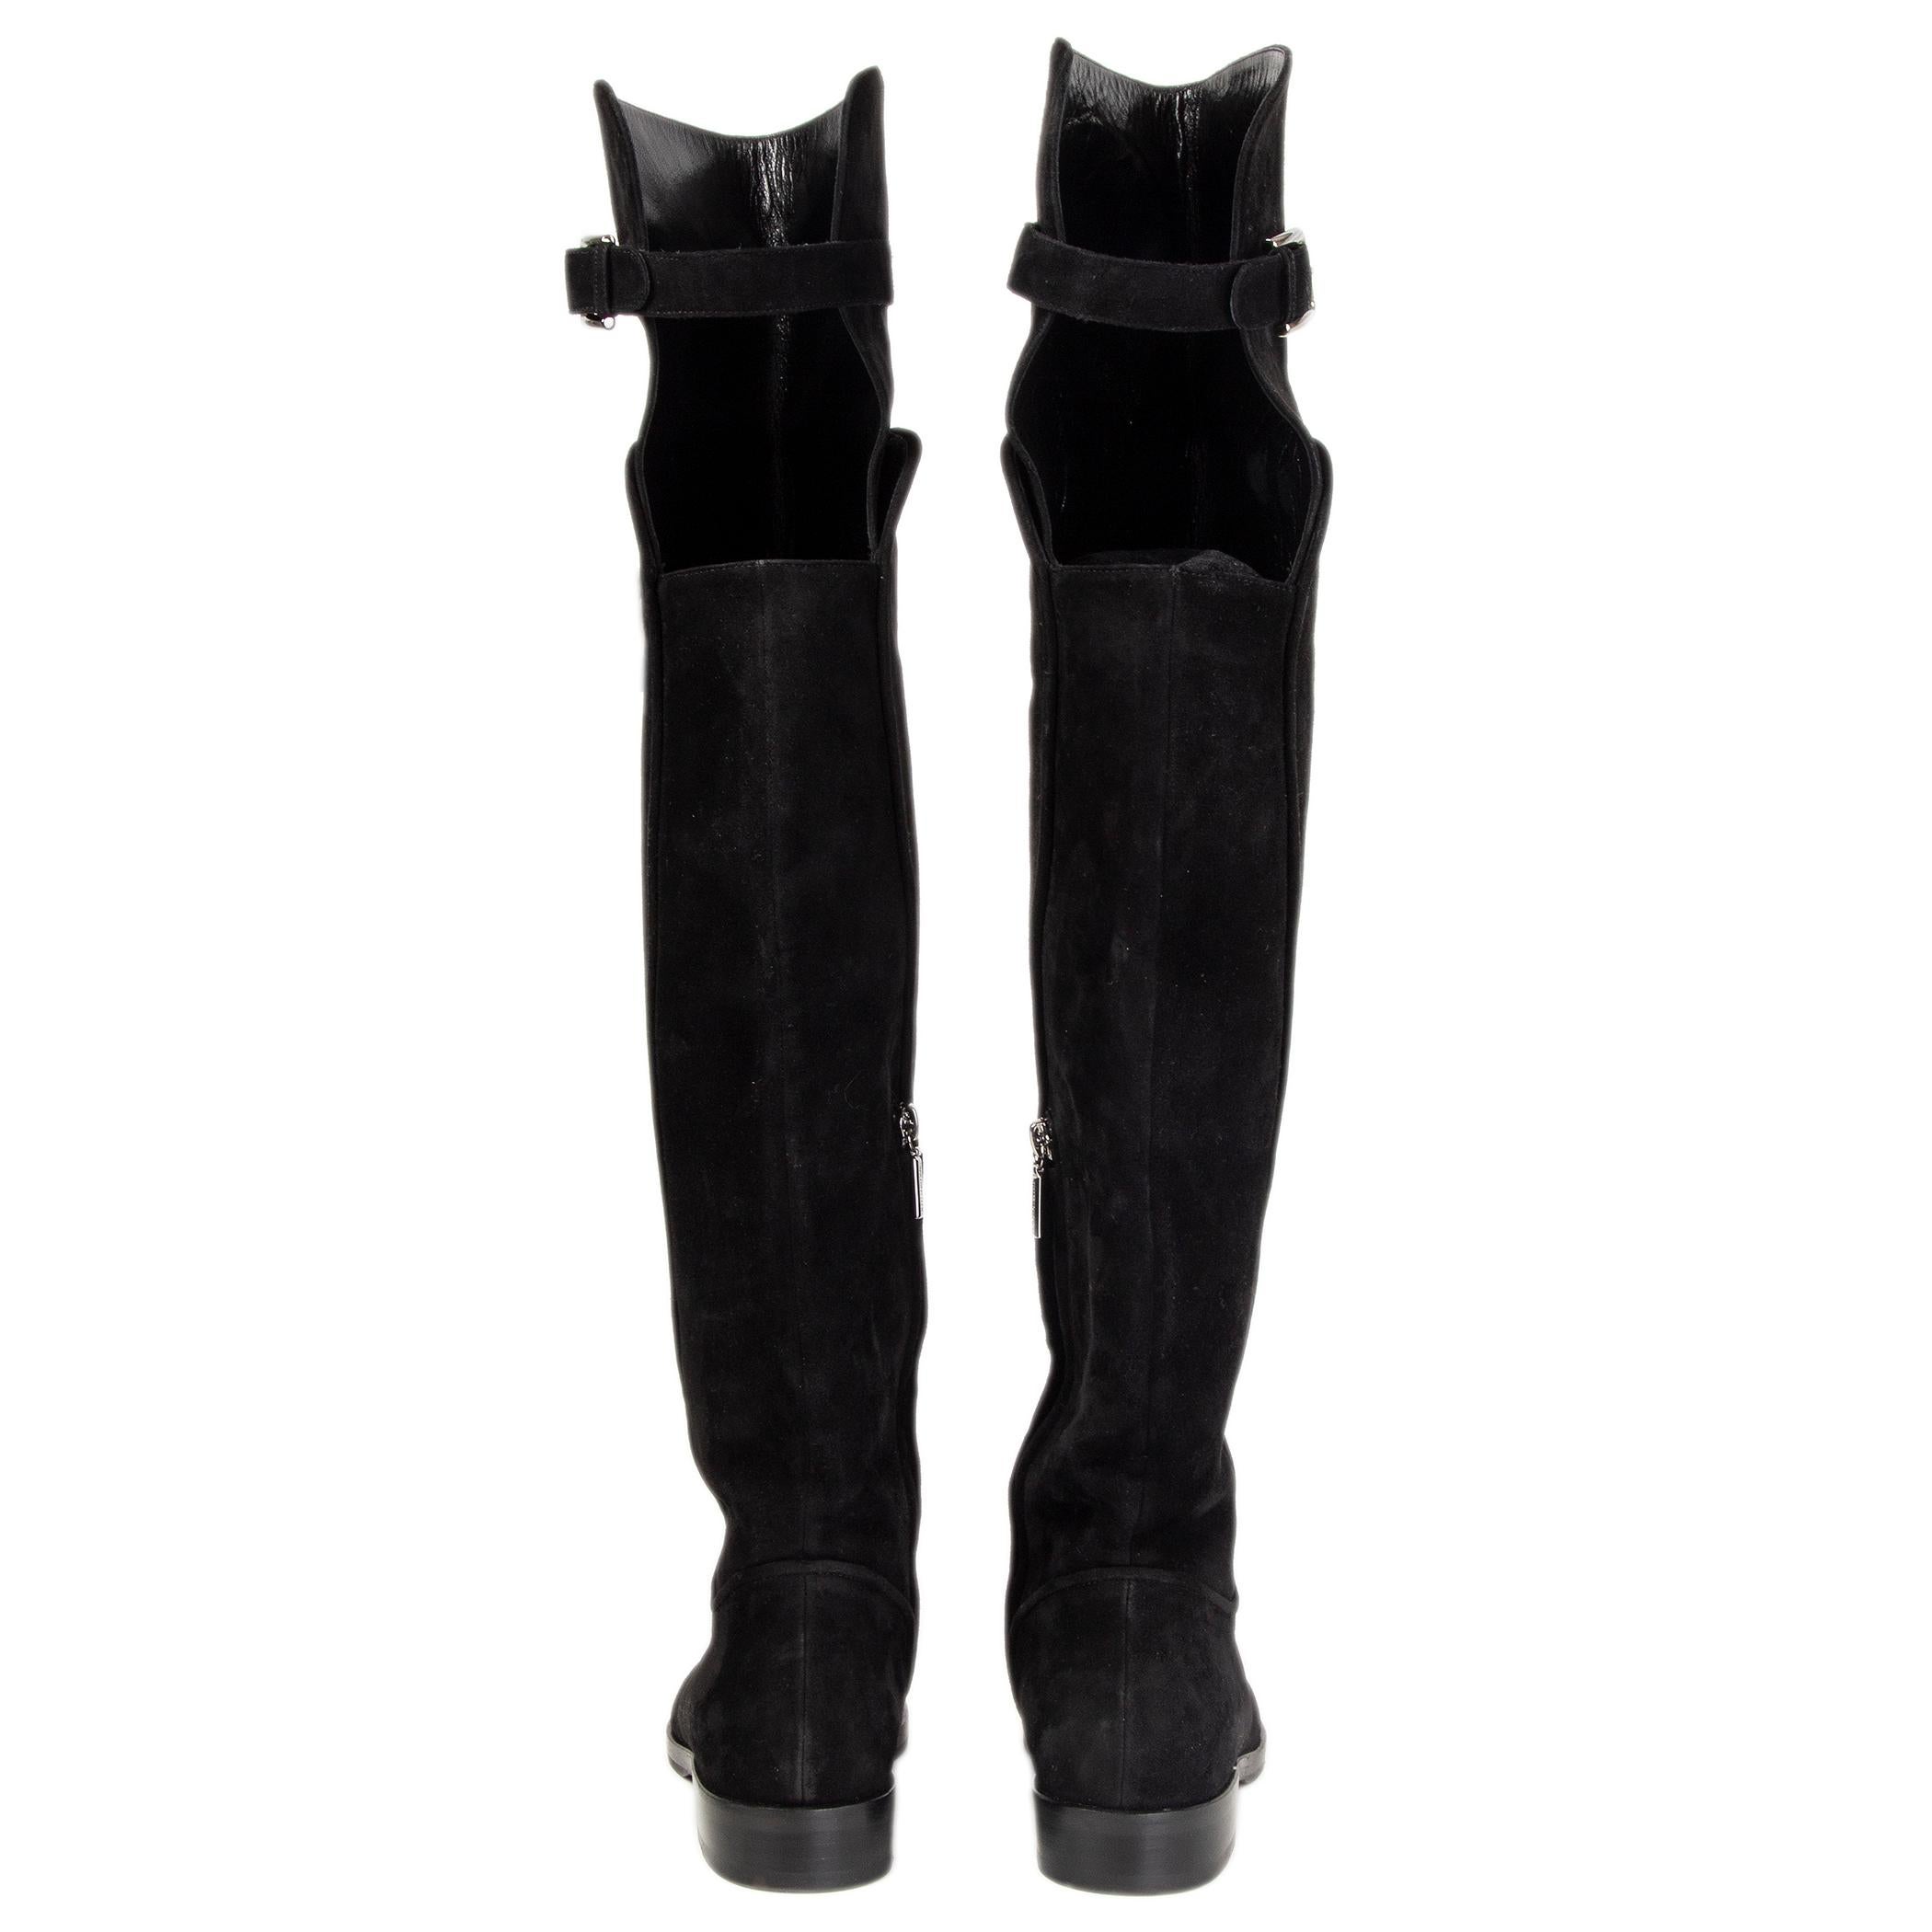 Black DOLCE & GABBANA black suede FLAT OVER THE KNEE Boots Shoes 38